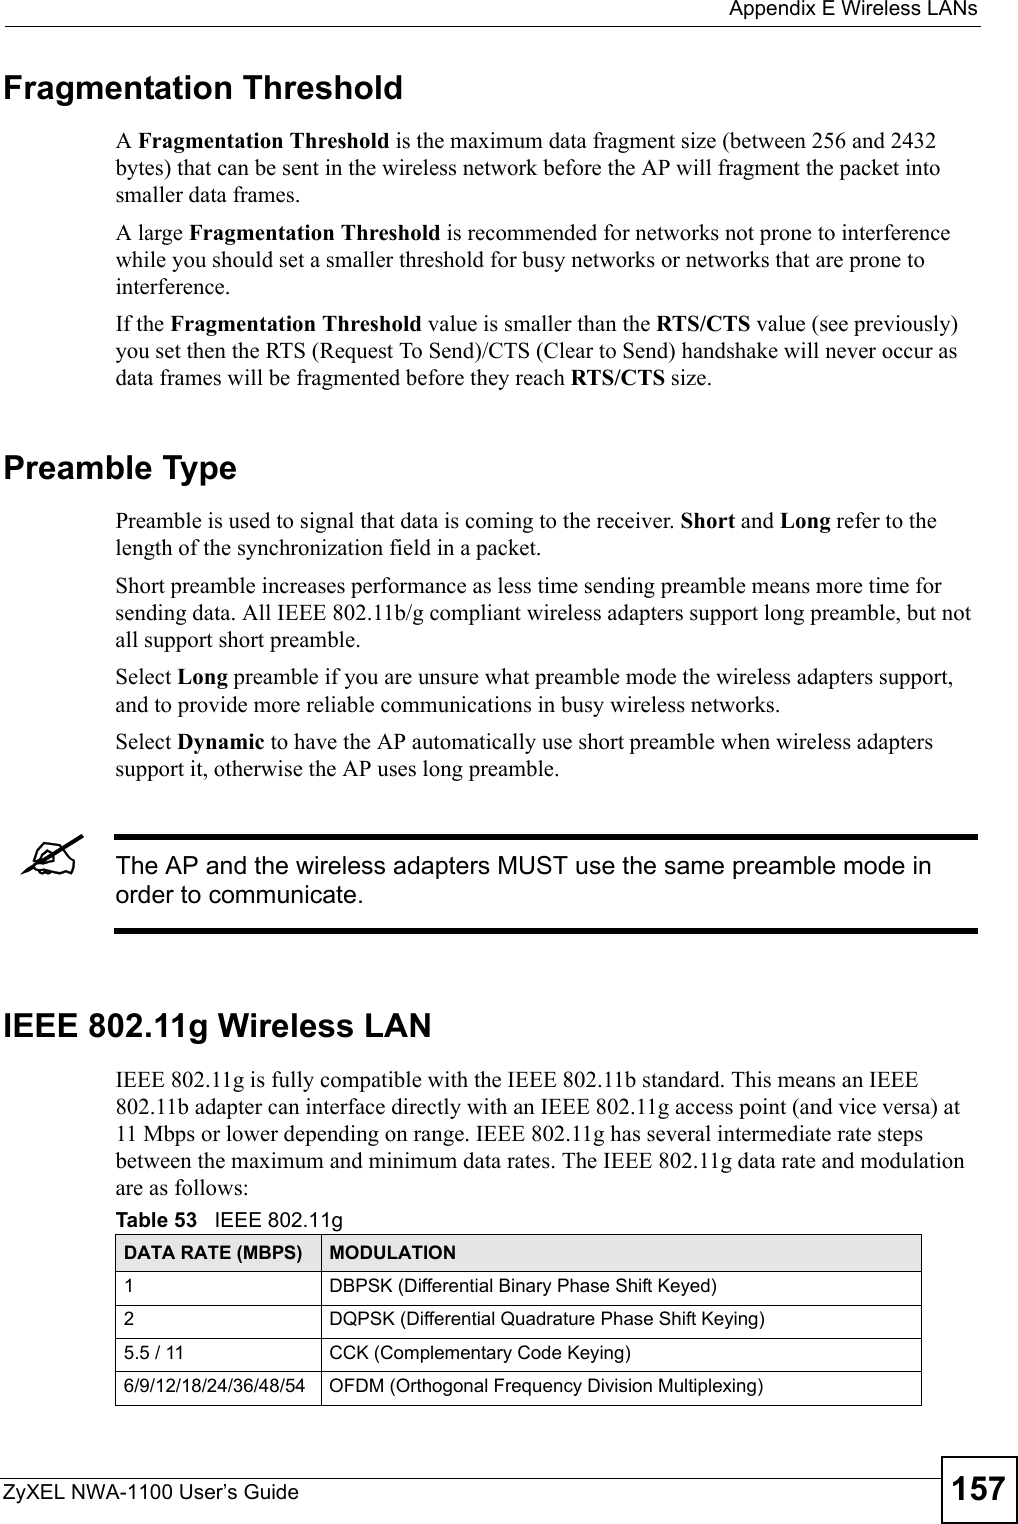  Appendix E Wireless LANsZyXEL NWA-1100 User’s Guide 157Fragmentation ThresholdA Fragmentation Threshold is the maximum data fragment size (between 256 and 2432 bytes) that can be sent in the wireless network before the AP will fragment the packet into smaller data frames.A large Fragmentation Threshold is recommended for networks not prone to interference while you should set a smaller threshold for busy networks or networks that are prone to interference.If the Fragmentation Threshold value is smaller than the RTS/CTS value (see previously) you set then the RTS (Request To Send)/CTS (Clear to Send) handshake will never occur as data frames will be fragmented before they reach RTS/CTS size.Preamble TypePreamble is used to signal that data is coming to the receiver. Short and Long refer to the length of the synchronization field in a packet.Short preamble increases performance as less time sending preamble means more time for sending data. All IEEE 802.11b/g compliant wireless adapters support long preamble, but not all support short preamble. Select Long preamble if you are unsure what preamble mode the wireless adapters support, and to provide more reliable communications in busy wireless networks. Select Dynamic to have the AP automatically use short preamble when wireless adapters support it, otherwise the AP uses long preamble.&quot;The AP and the wireless adapters MUST use the same preamble mode in order to communicate.IEEE 802.11g Wireless LANIEEE 802.11g is fully compatible with the IEEE 802.11b standard. This means an IEEE 802.11b adapter can interface directly with an IEEE 802.11g access point (and vice versa) at 11 Mbps or lower depending on range. IEEE 802.11g has several intermediate rate steps between the maximum and minimum data rates. The IEEE 802.11g data rate and modulation are as follows:Table 53   IEEE 802.11gDATA RATE (MBPS) MODULATION1 DBPSK (Differential Binary Phase Shift Keyed)2 DQPSK (Differential Quadrature Phase Shift Keying)5.5 / 11 CCK (Complementary Code Keying) 6/9/12/18/24/36/48/54 OFDM (Orthogonal Frequency Division Multiplexing) 